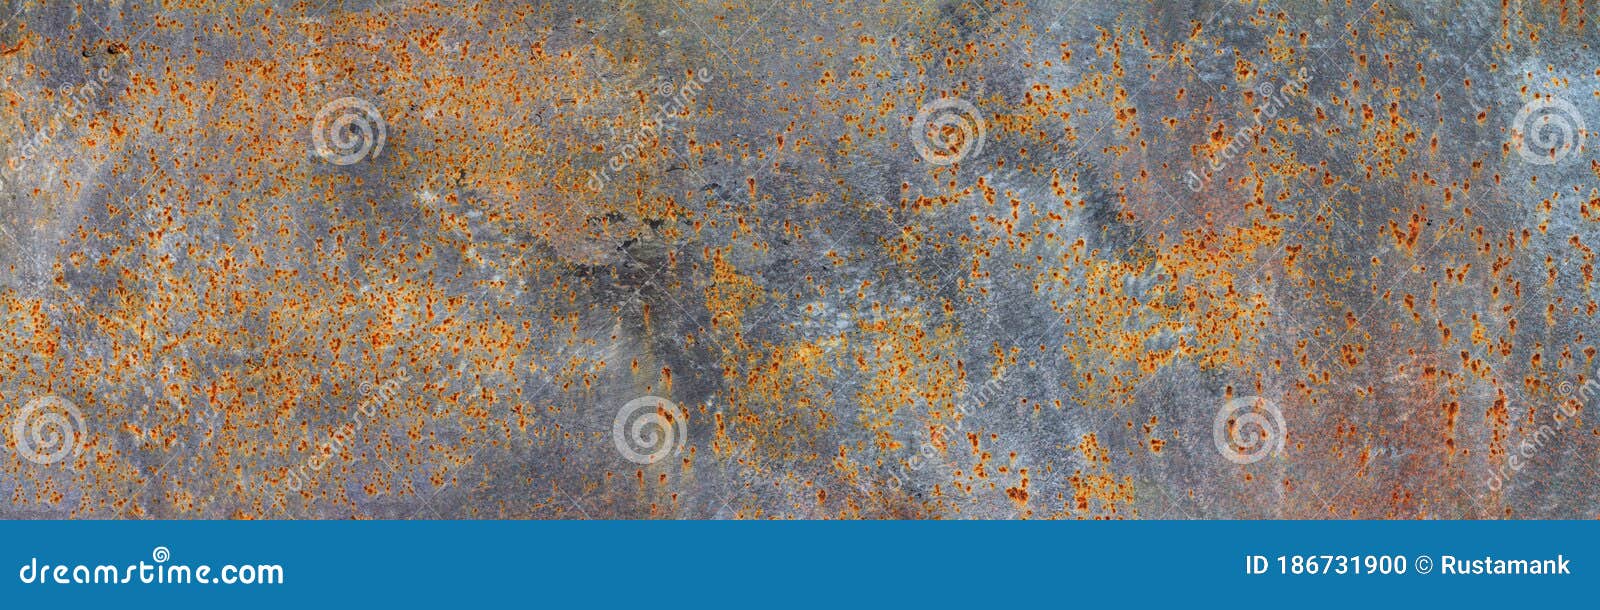 panoramic grunge rusted metal texture, rust and oxidized metal background